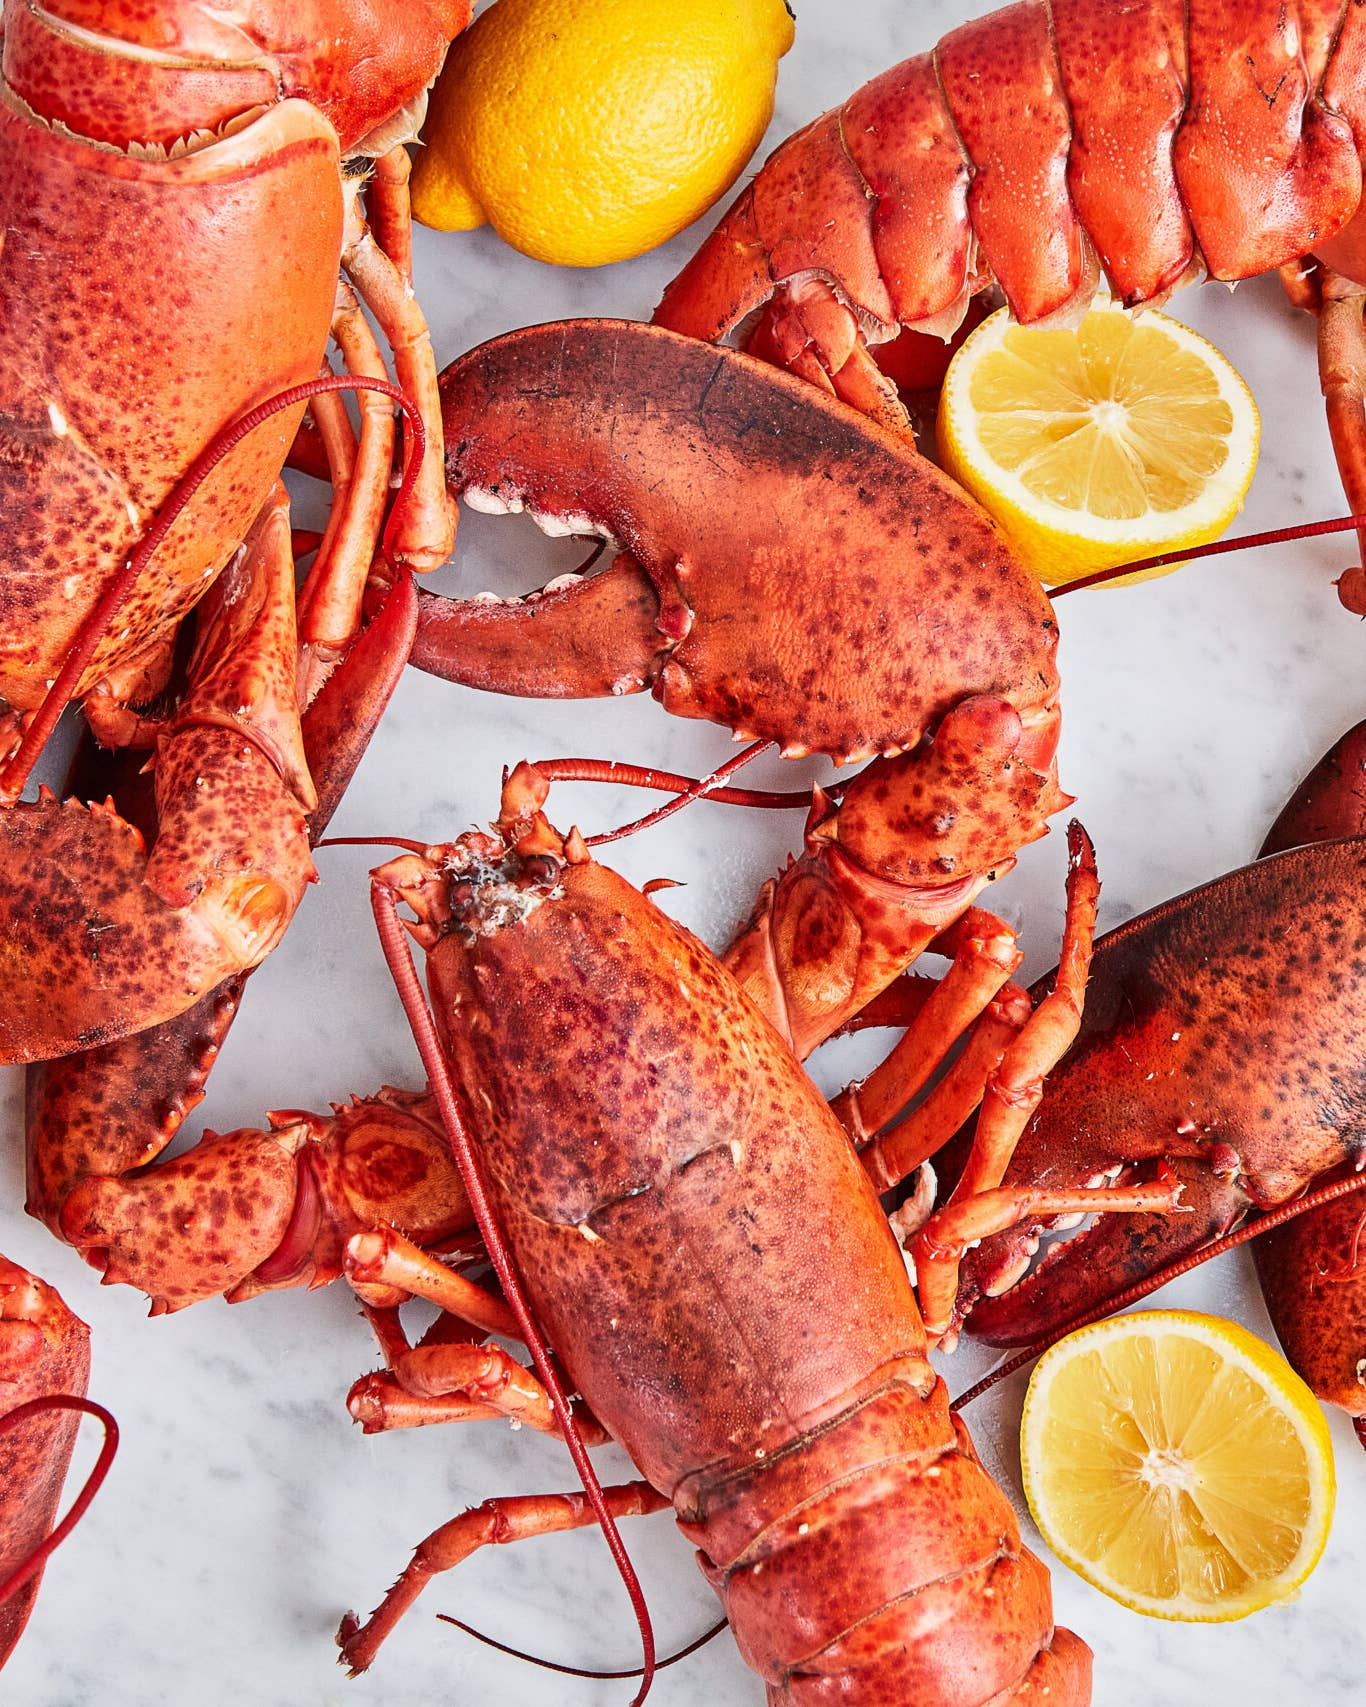 How To Cook a Lobster, According to a Maine Lobsterman